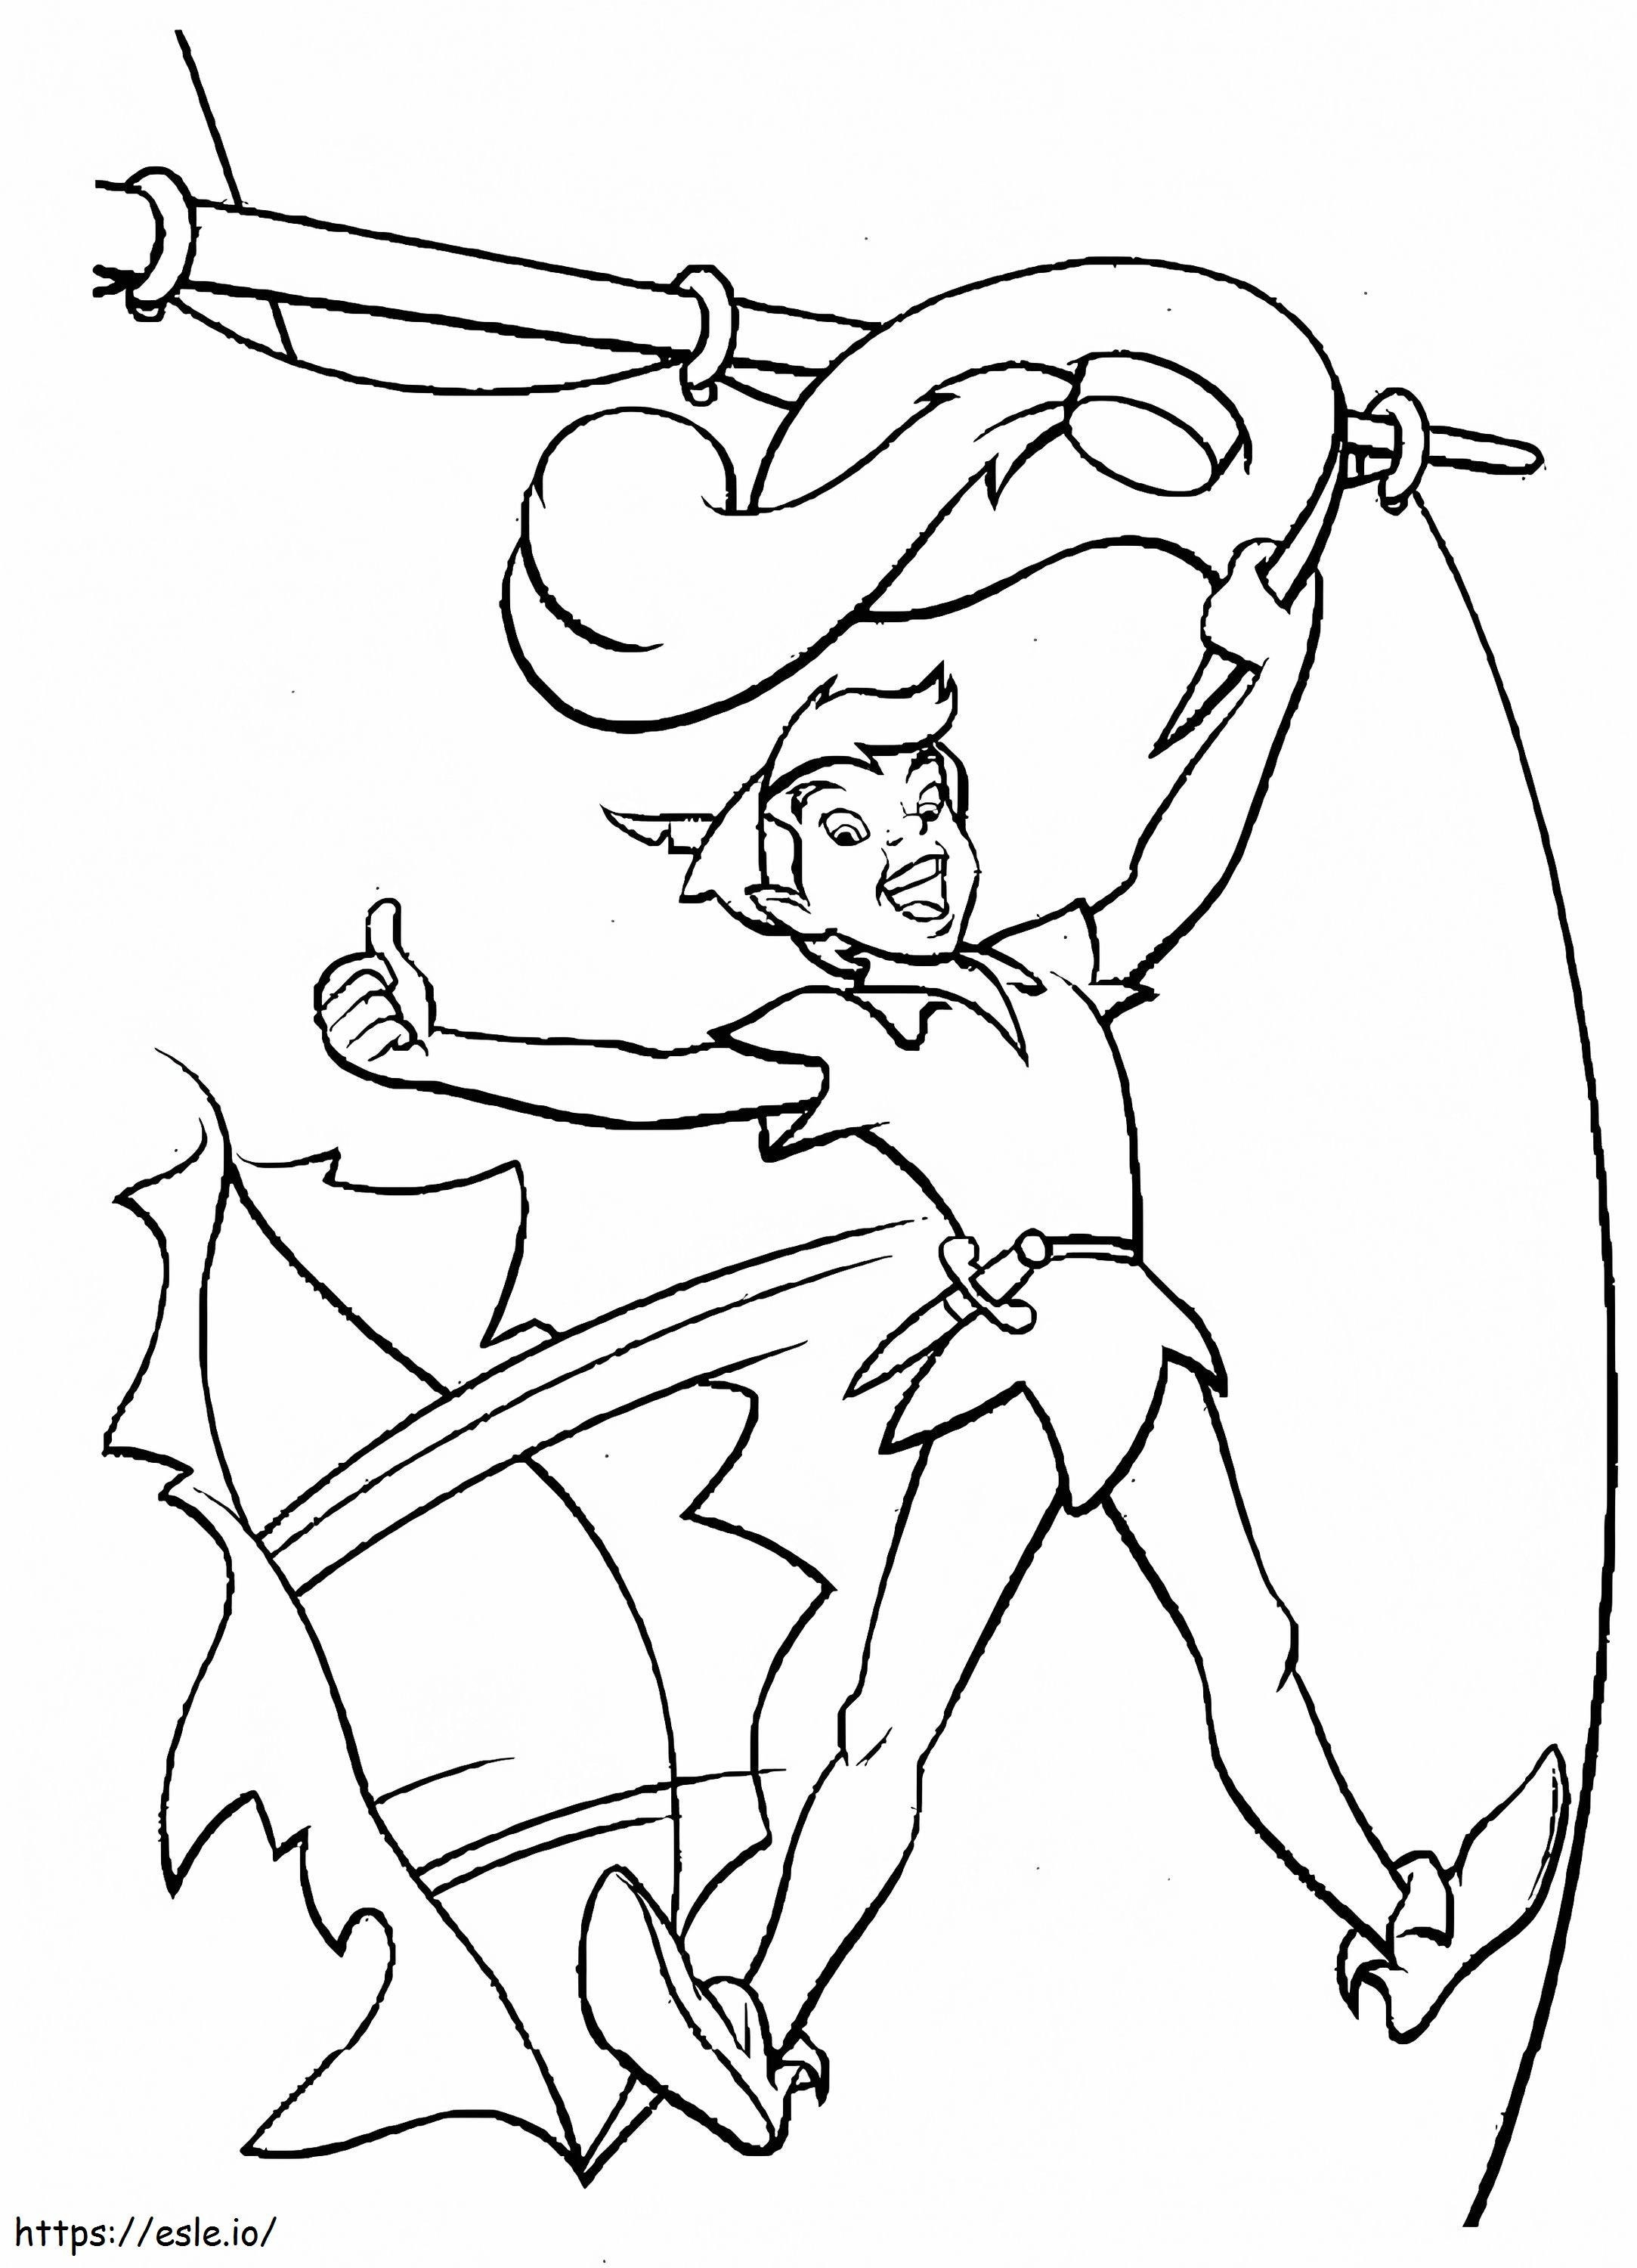 Peter Pan On The Pirate Ship coloring page